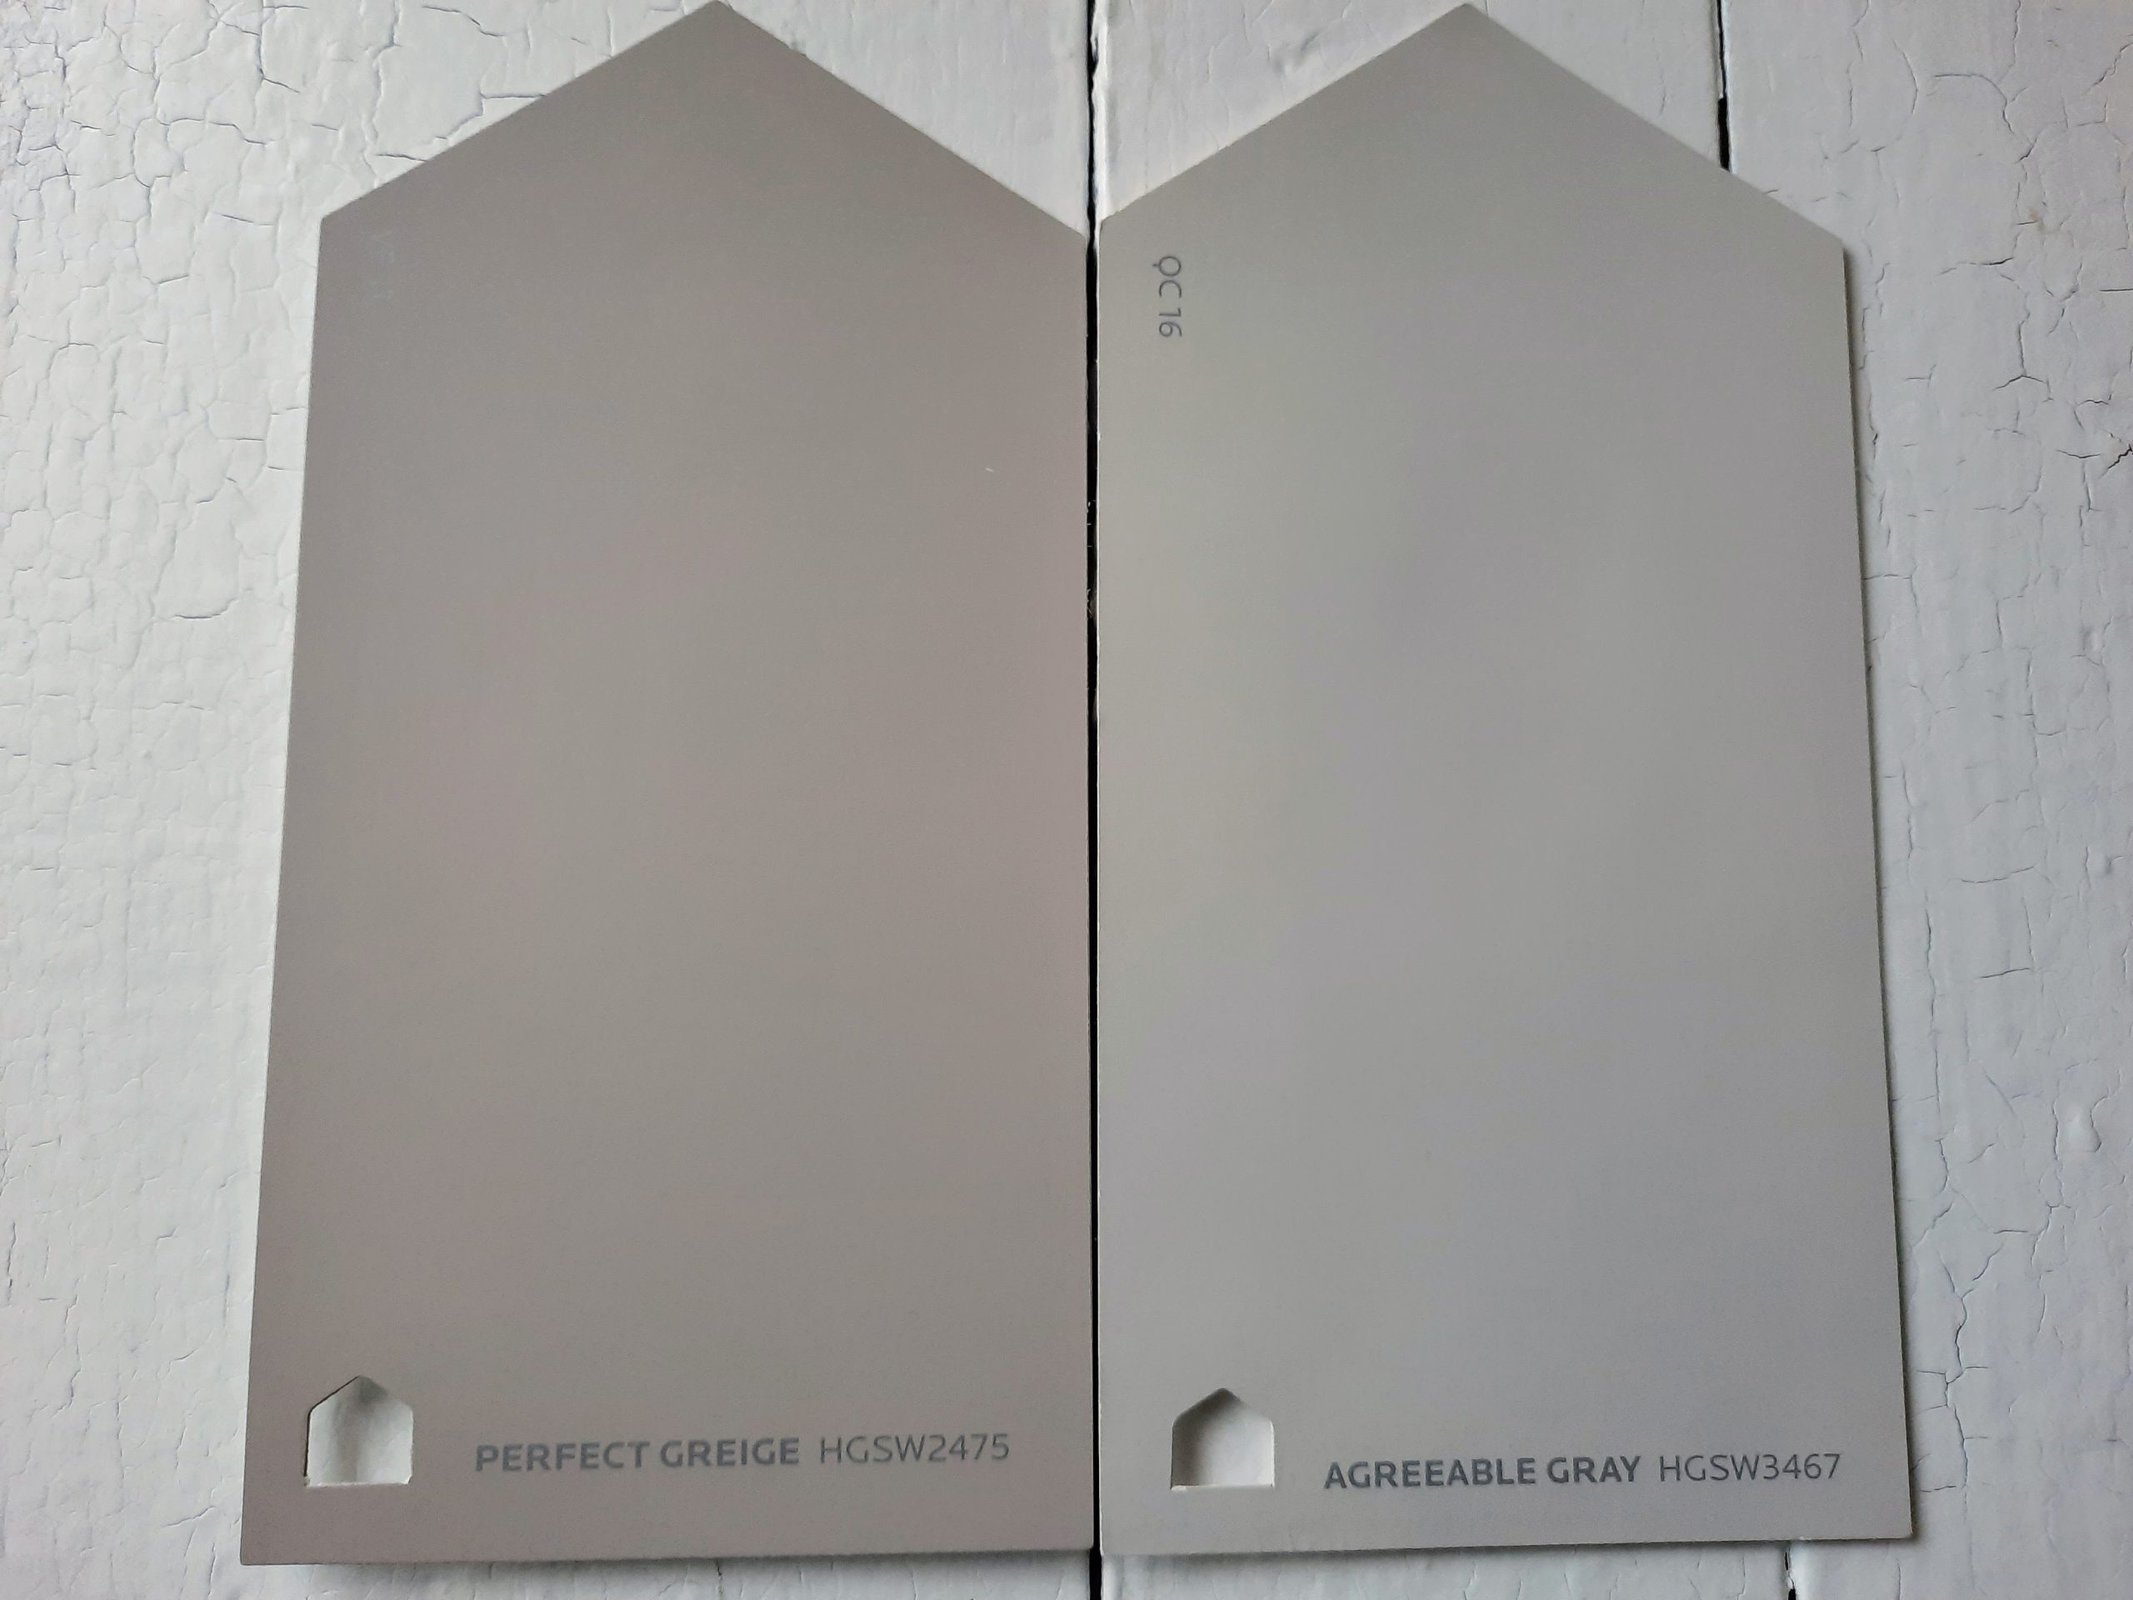 8 Perfect Greige vs Agreeable Gray by Sherwin Williams scaled